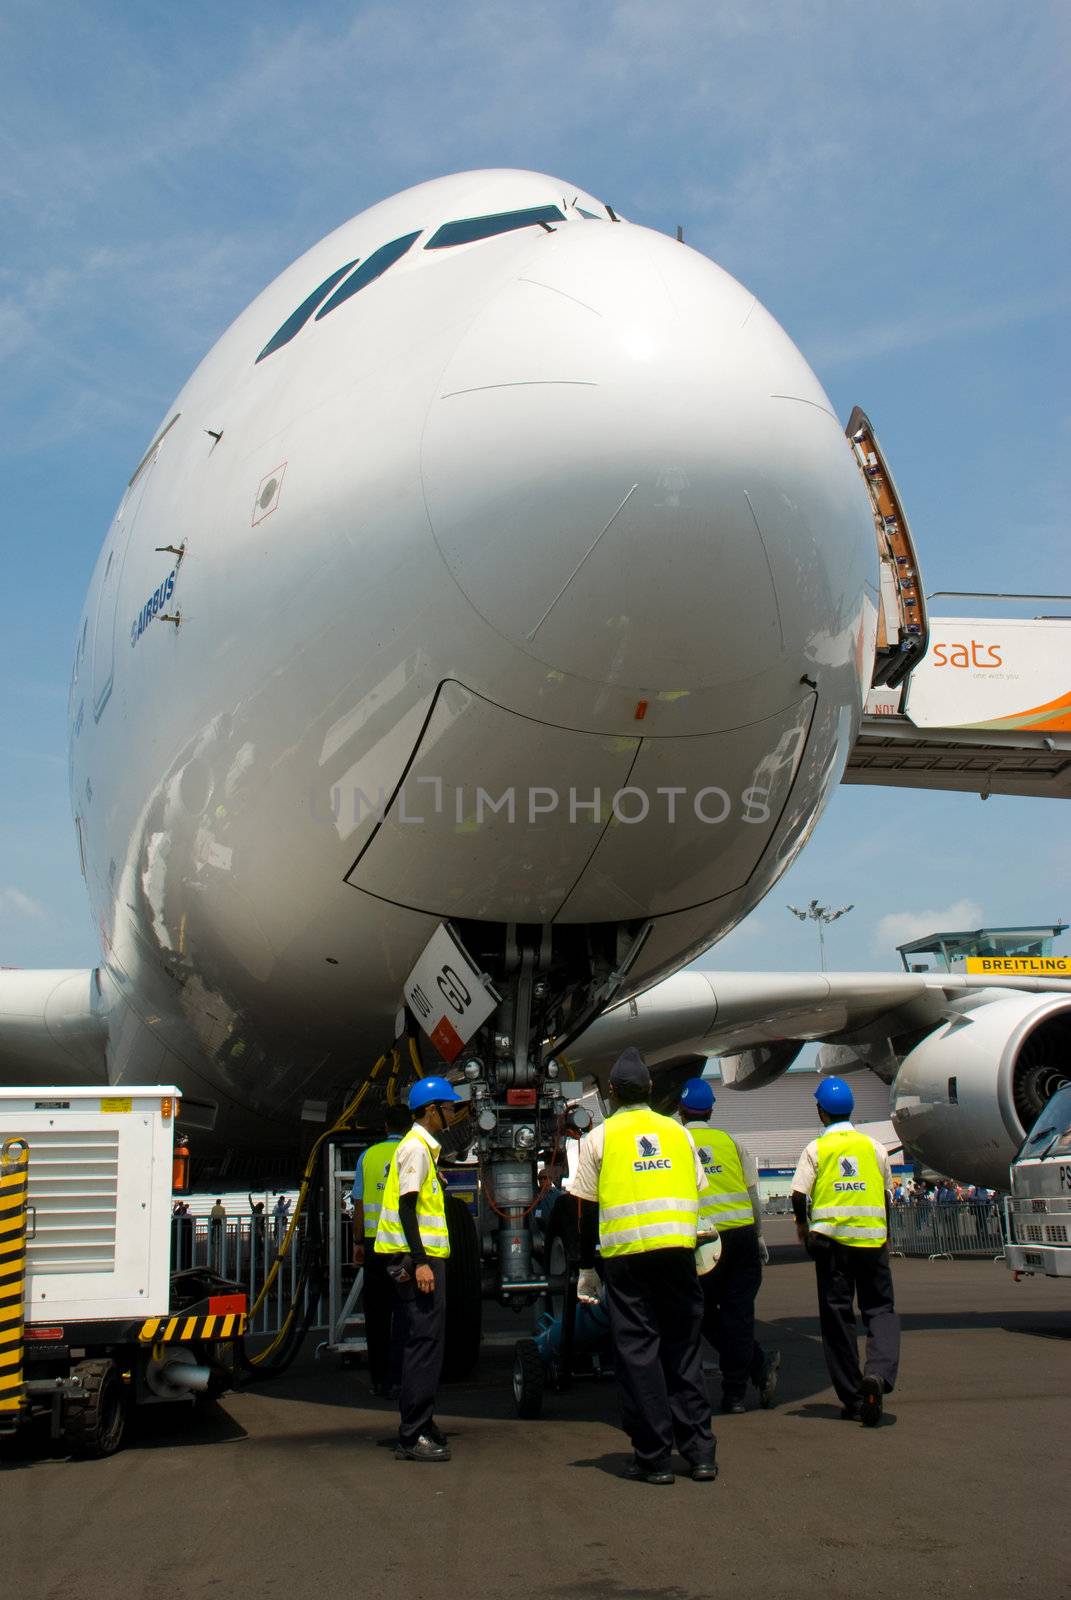 Airbus A380 at the static aircraft display area preparing to take off for fly pass.